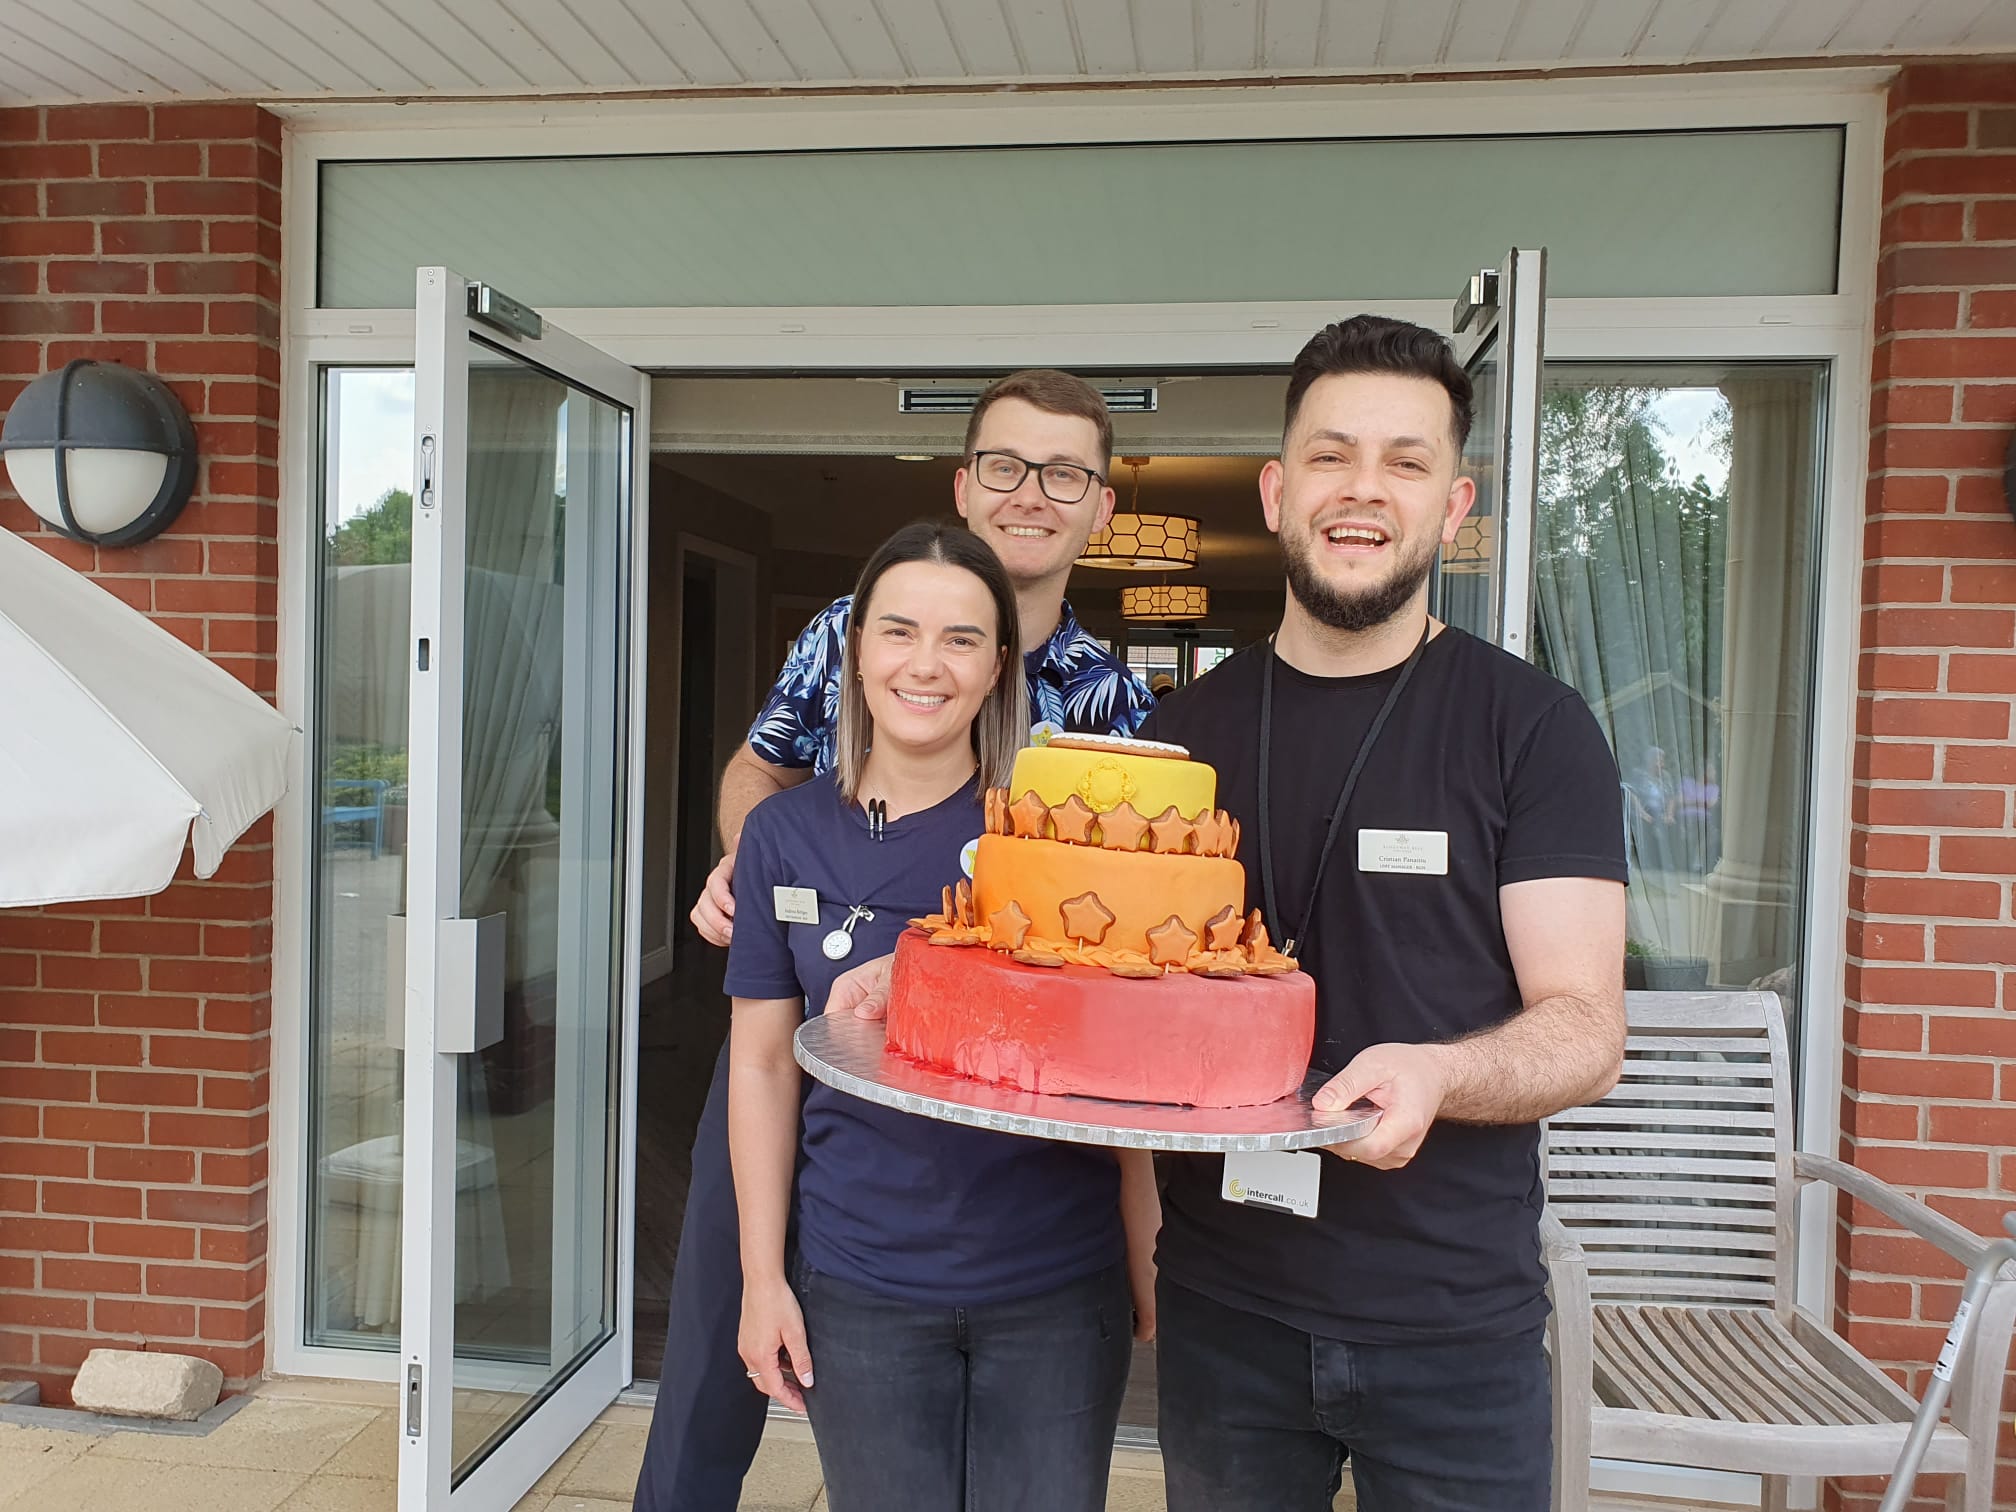 Our staff posing with a thank you cake on Glad to Care Week